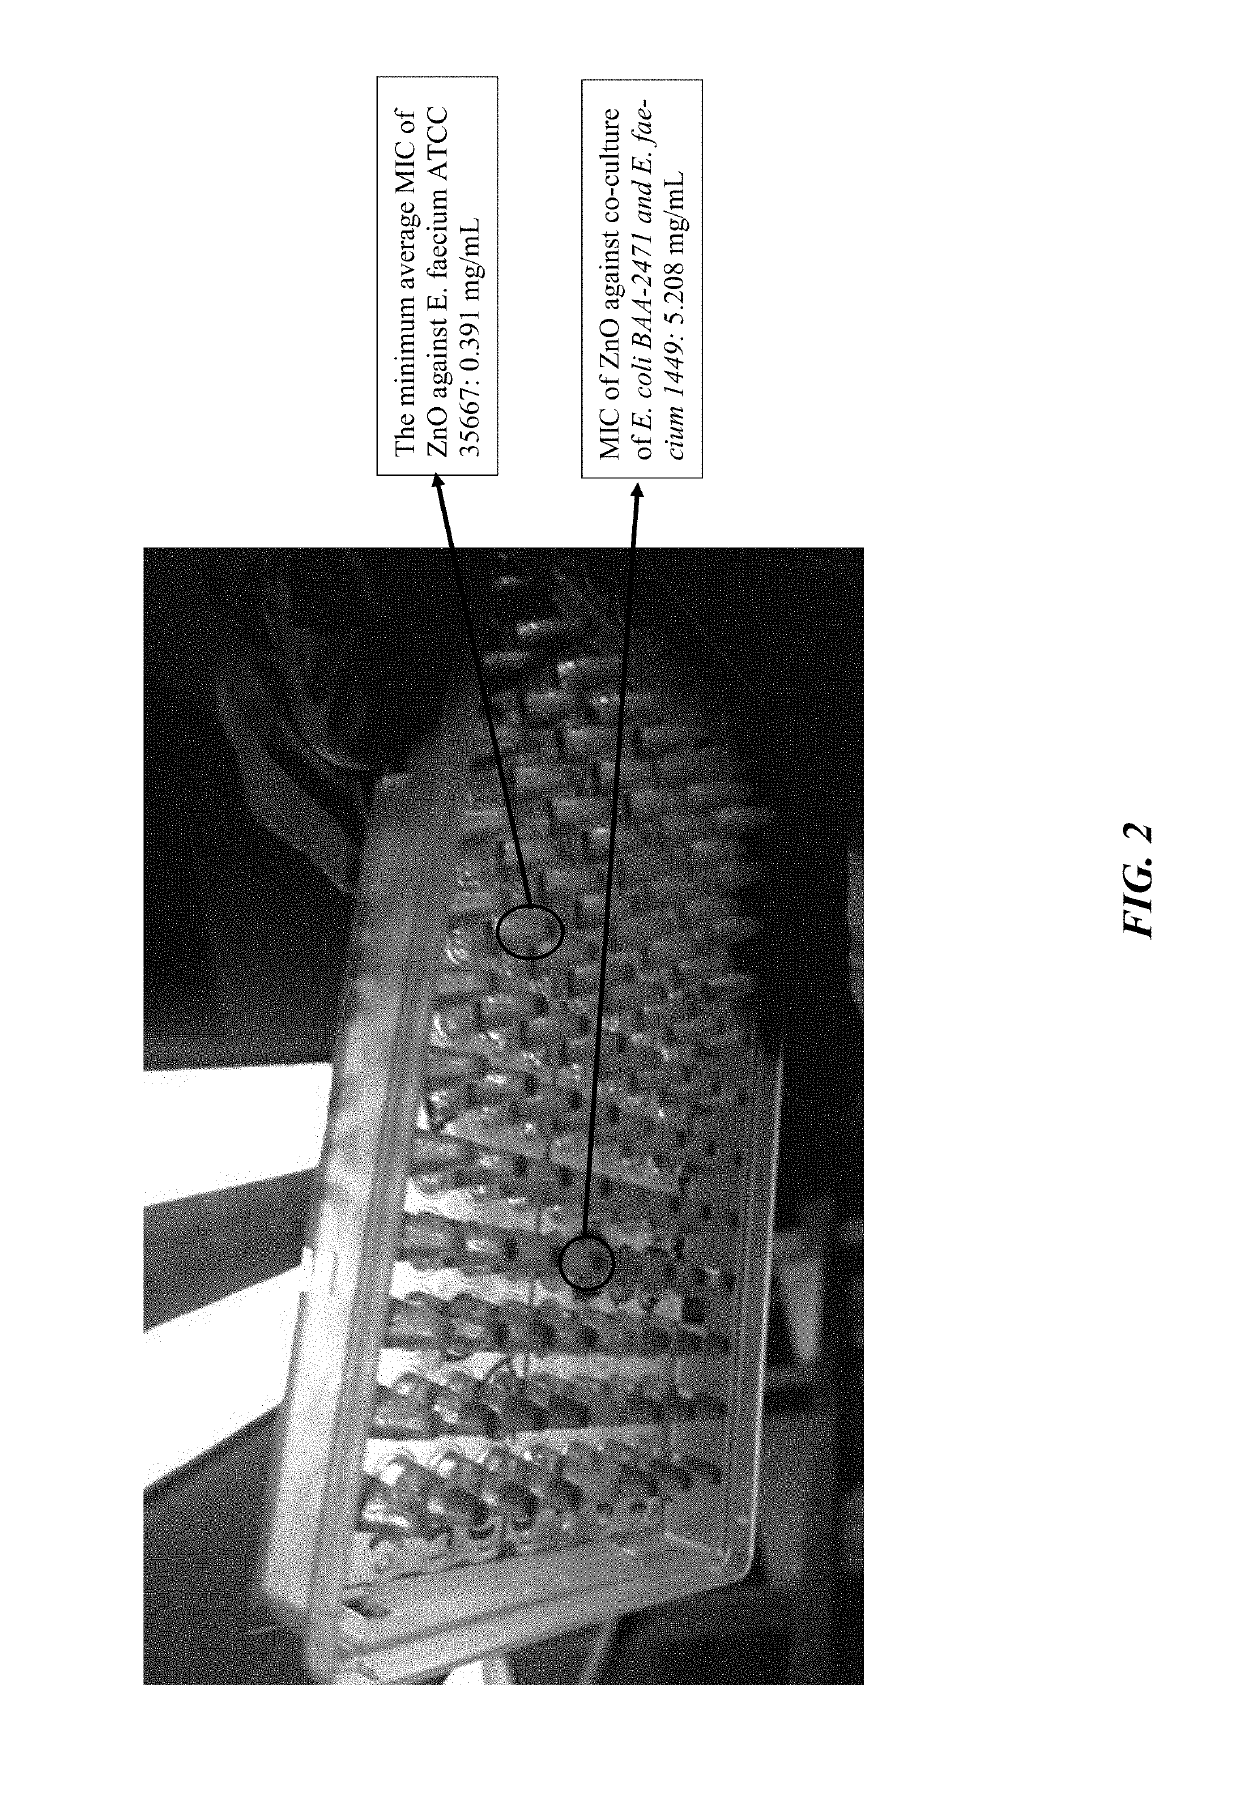 Compositions for treating drug resistant bacteria and biofilm